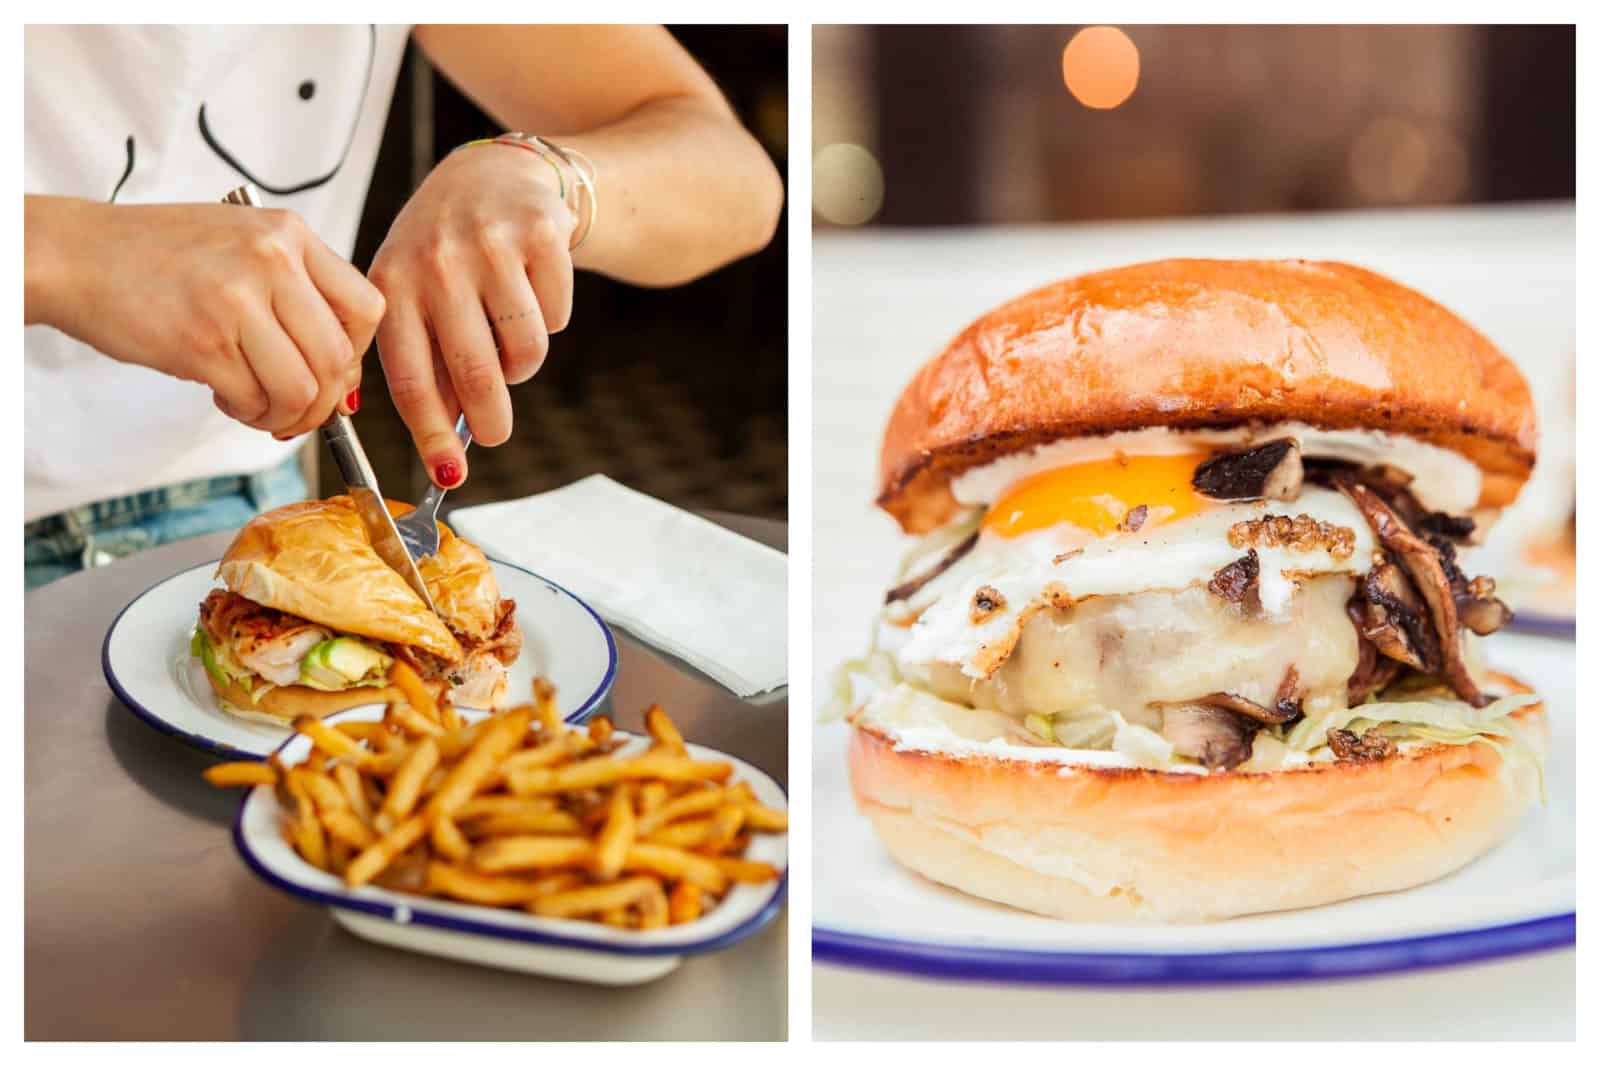 One of the best places to go for a burger in Paris is PNY for its variety of burger fillings like this grilled chicken one with crispy fries which this girl is tucking into (left). A PNY burger in Paris with original fillings like an egg and mushrooms (right).